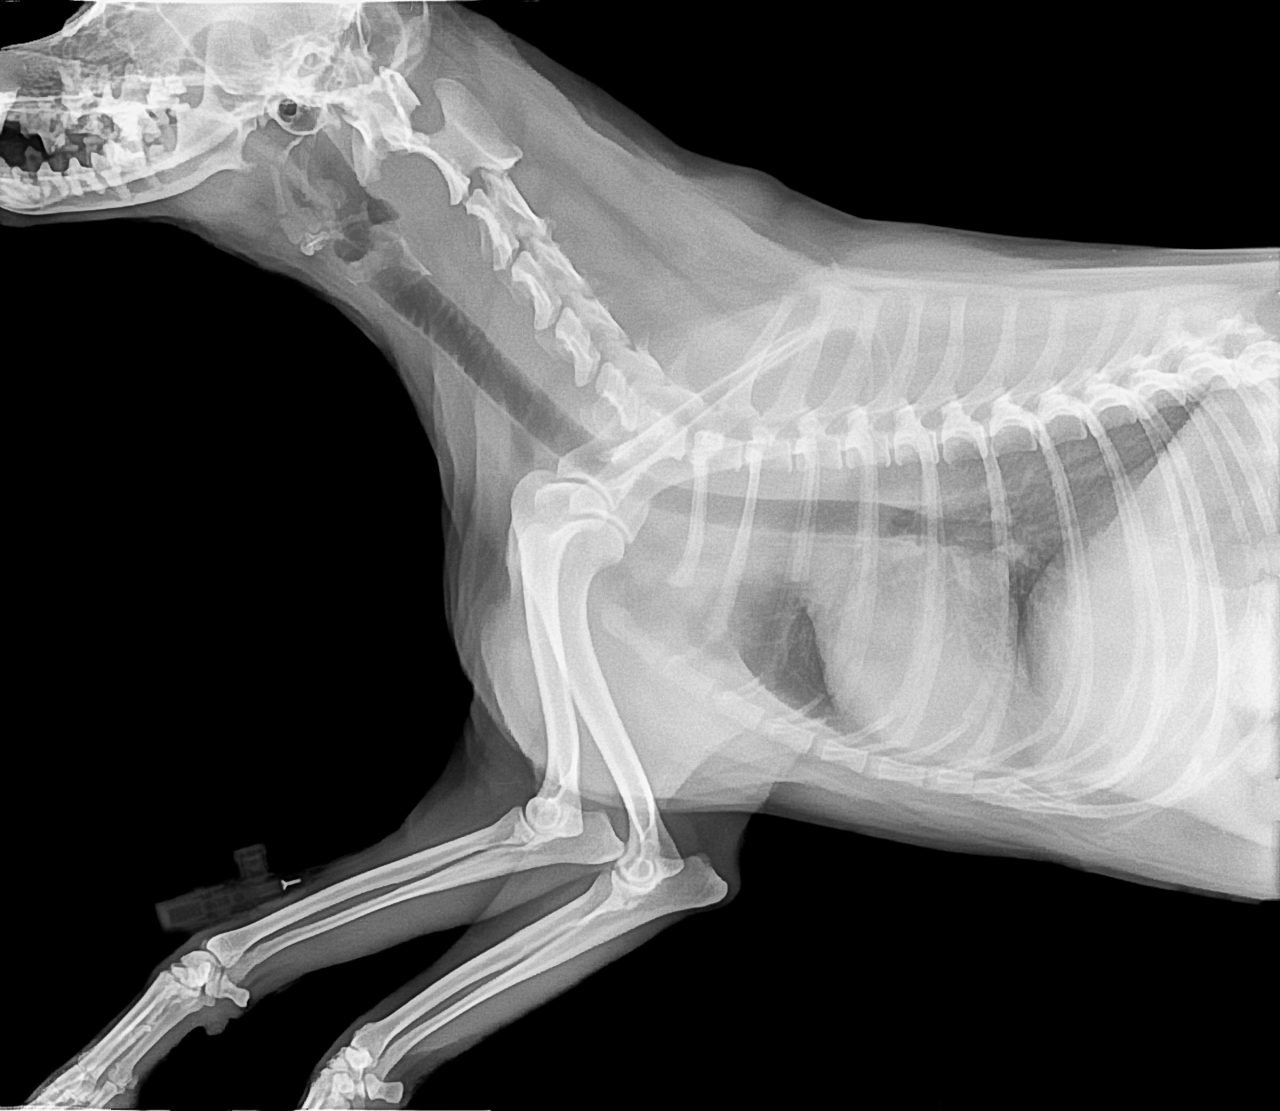 Why Are Dog X-Rays So Expensive?